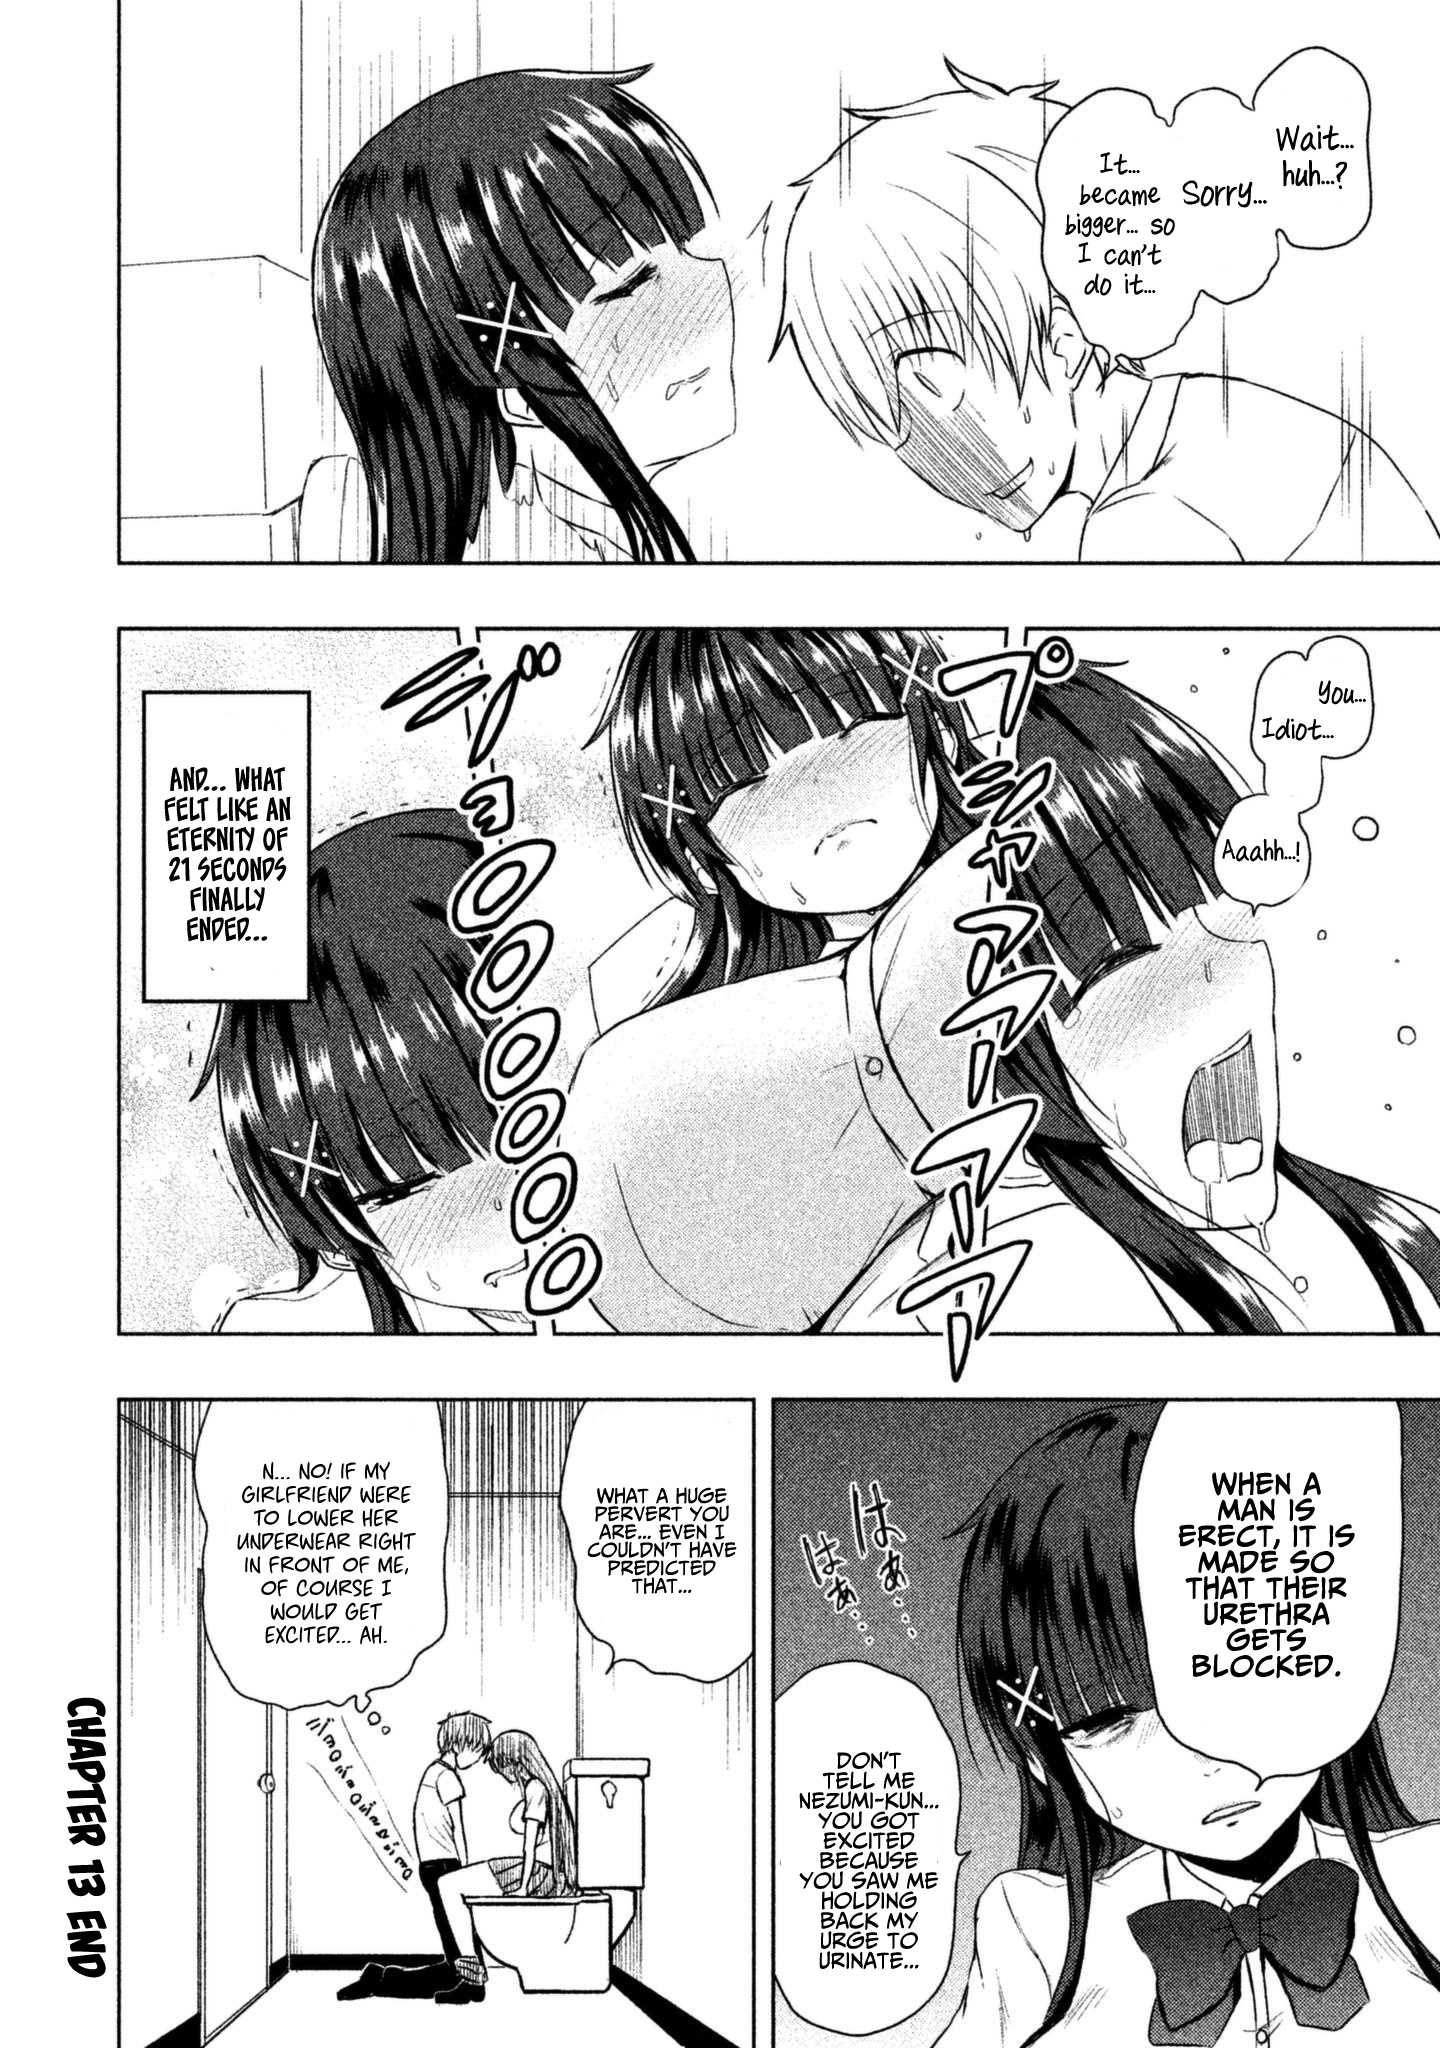 A Girl Who Is Very Well-Informed About Weird Knowledge, Takayukashiki Souko-San Chapter 13 #9